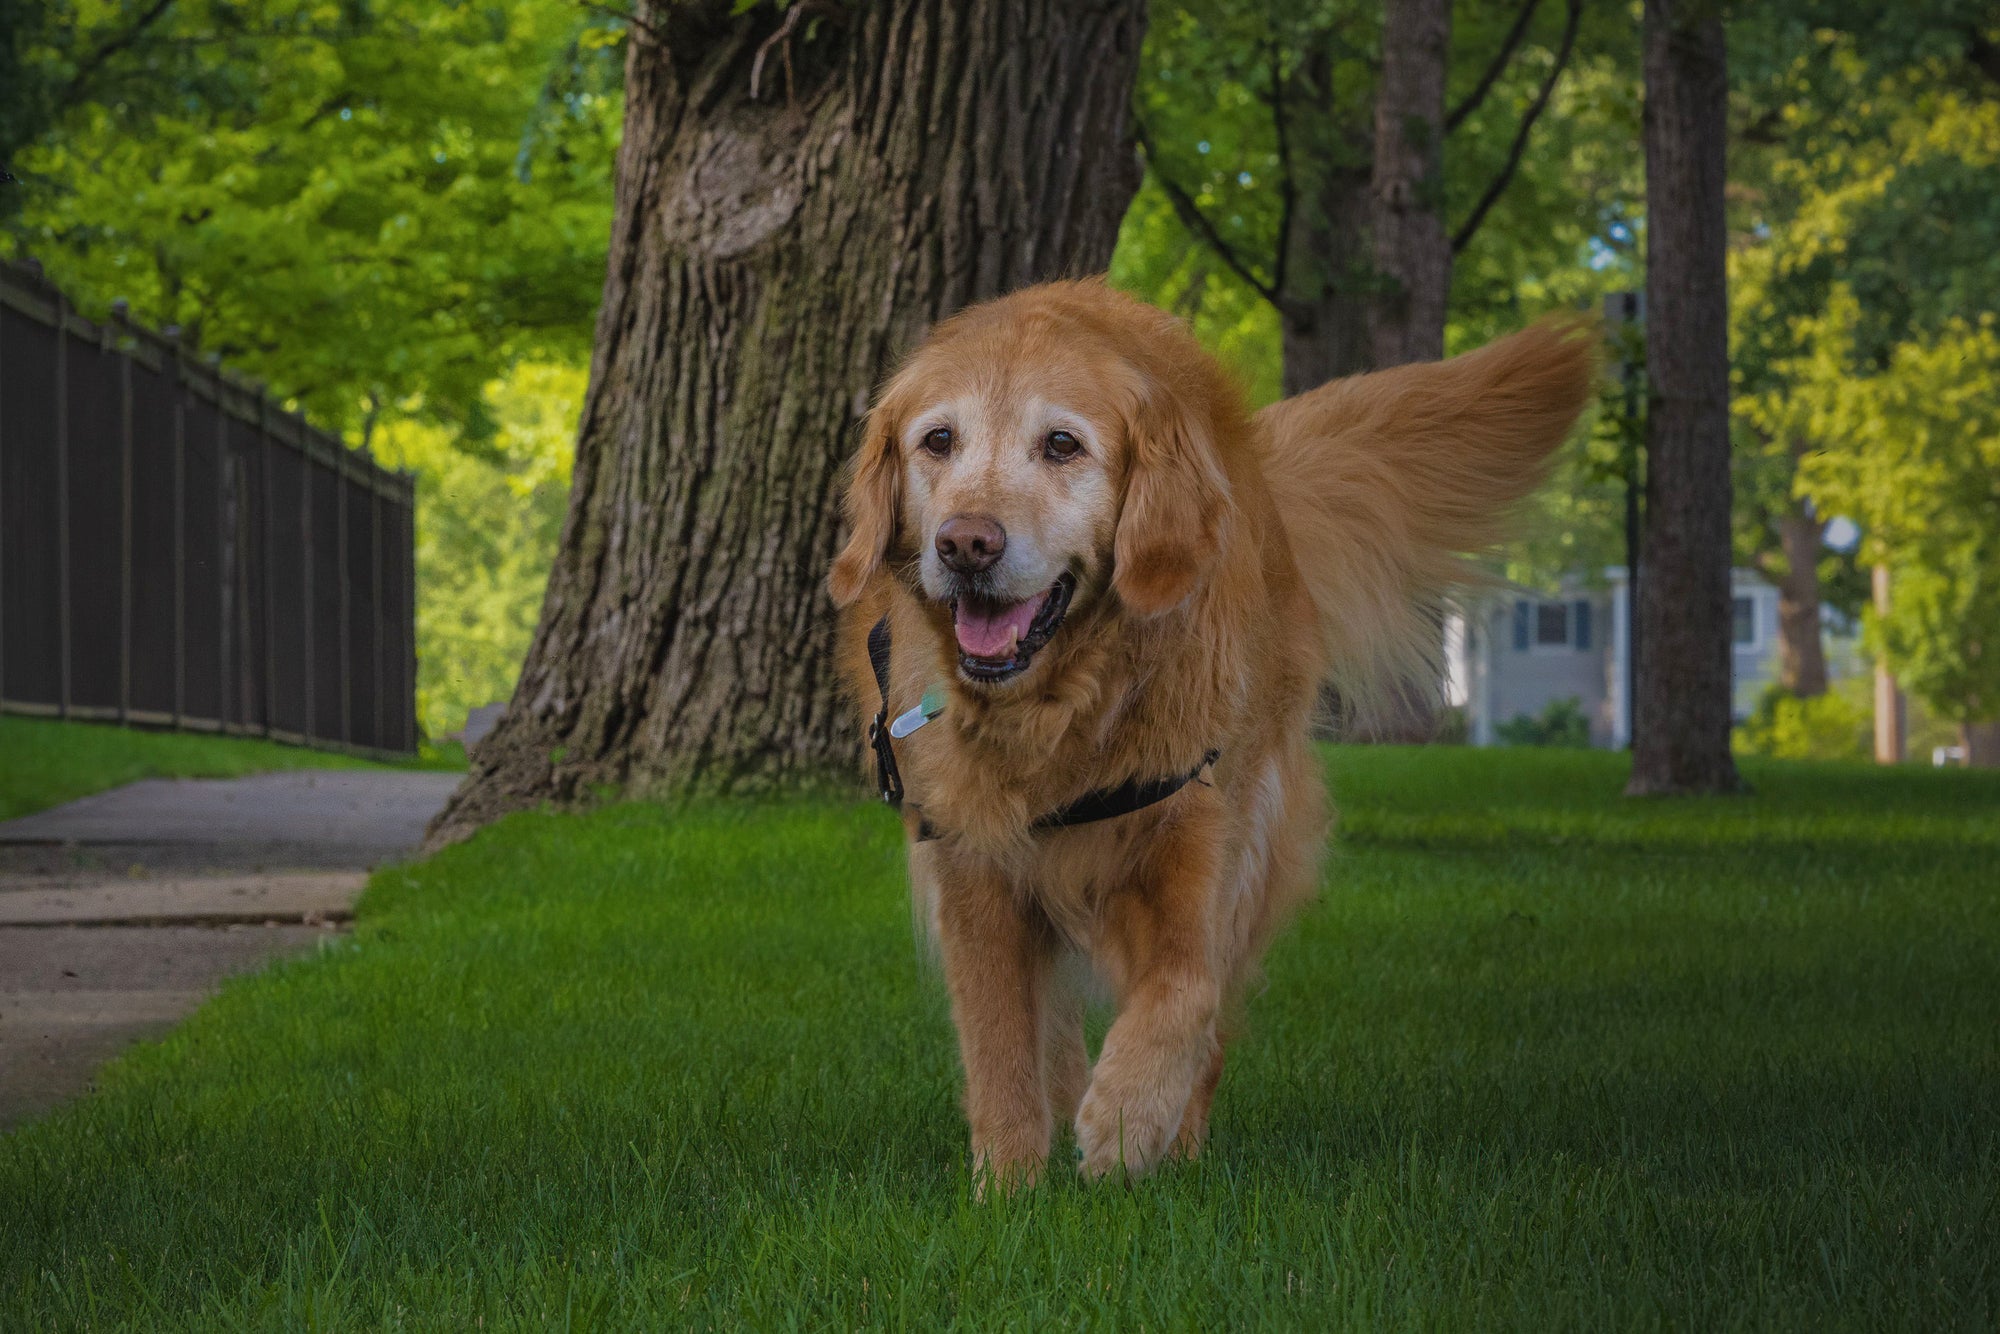 A dog walking on grass with trees in the background.